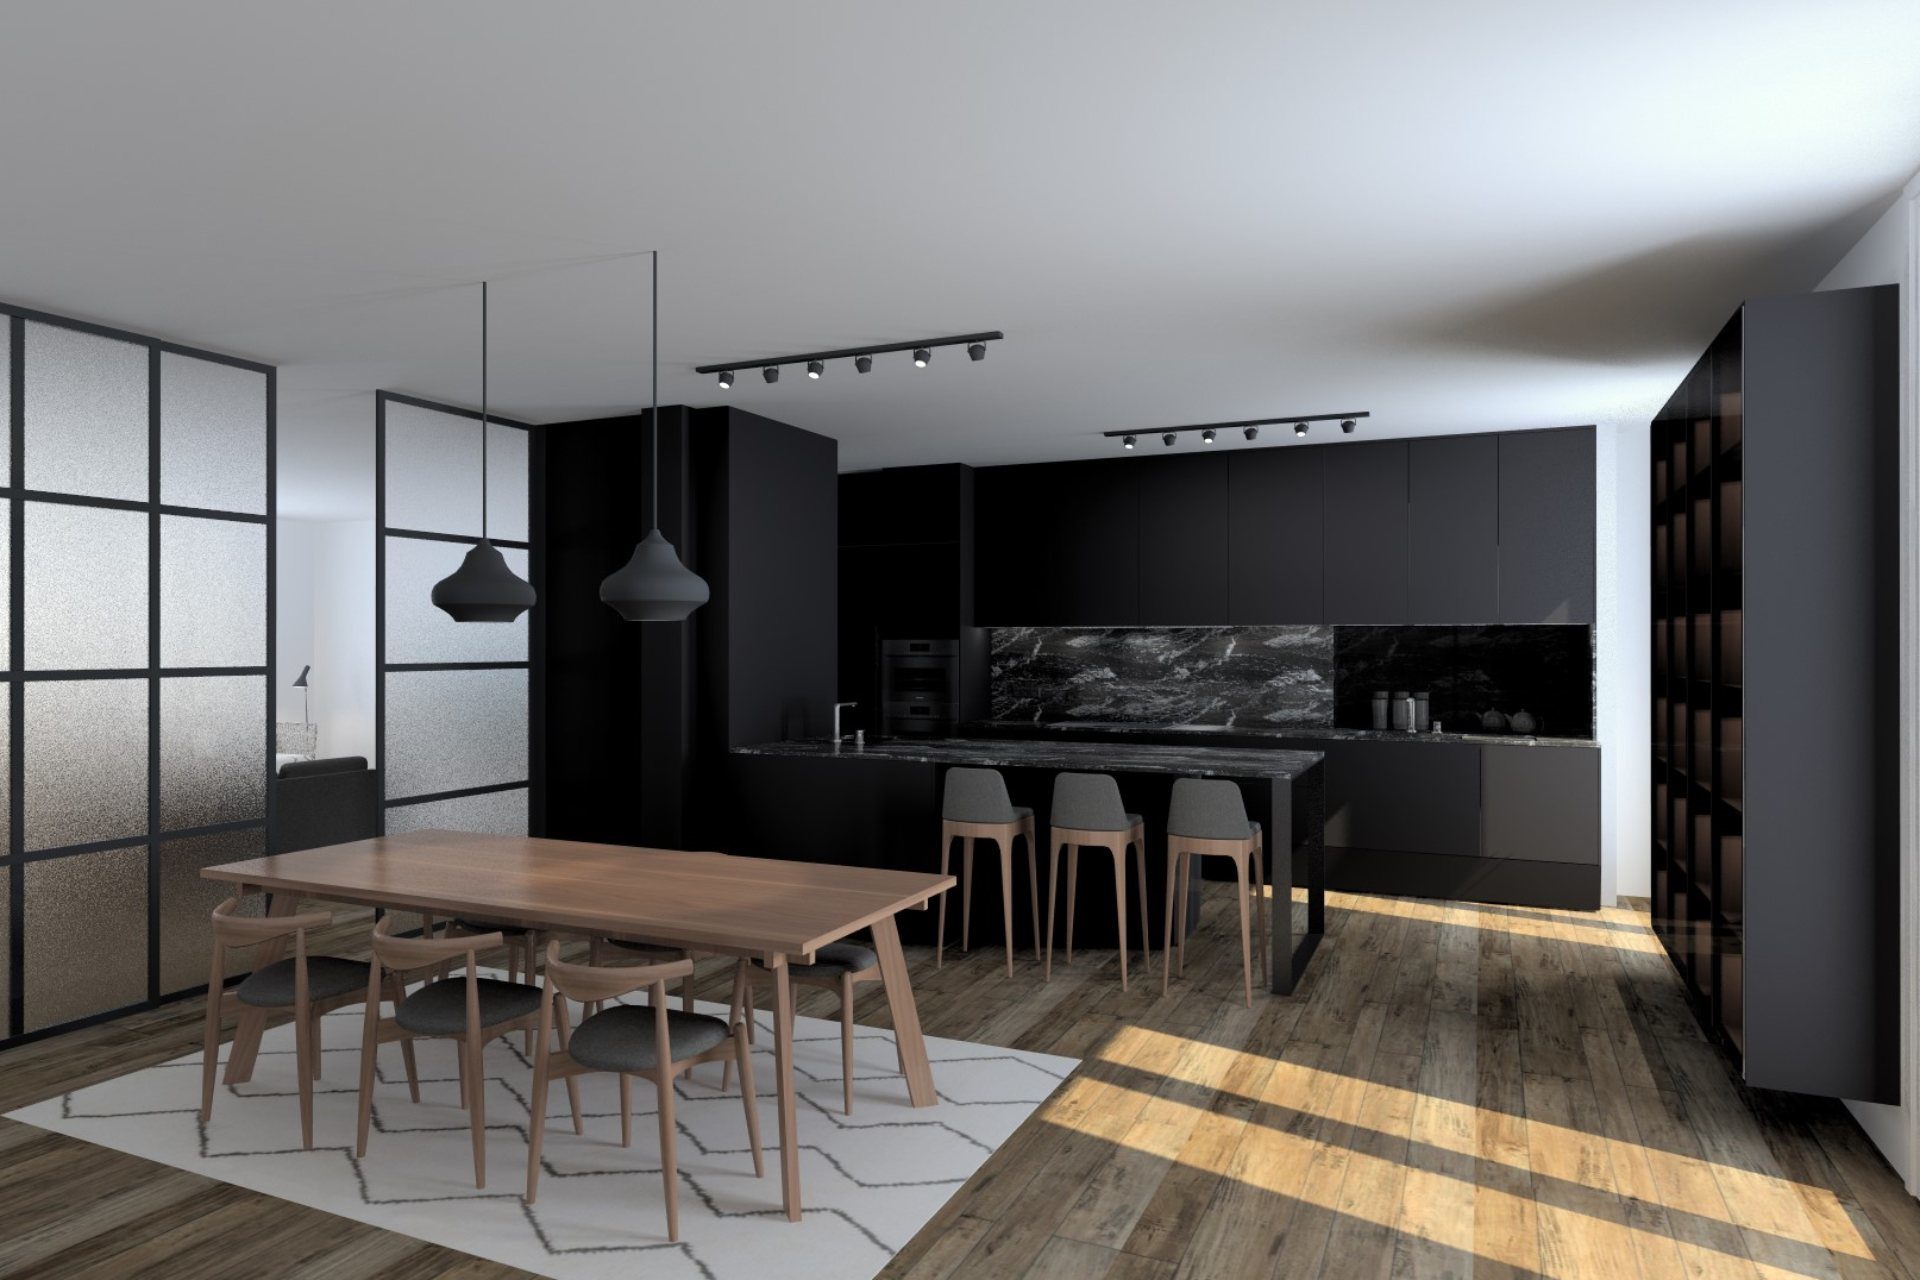 Image of black L-shaped display cabinet and kitchen units with grey worktop and credence, wooden high chairs, tables and chairs